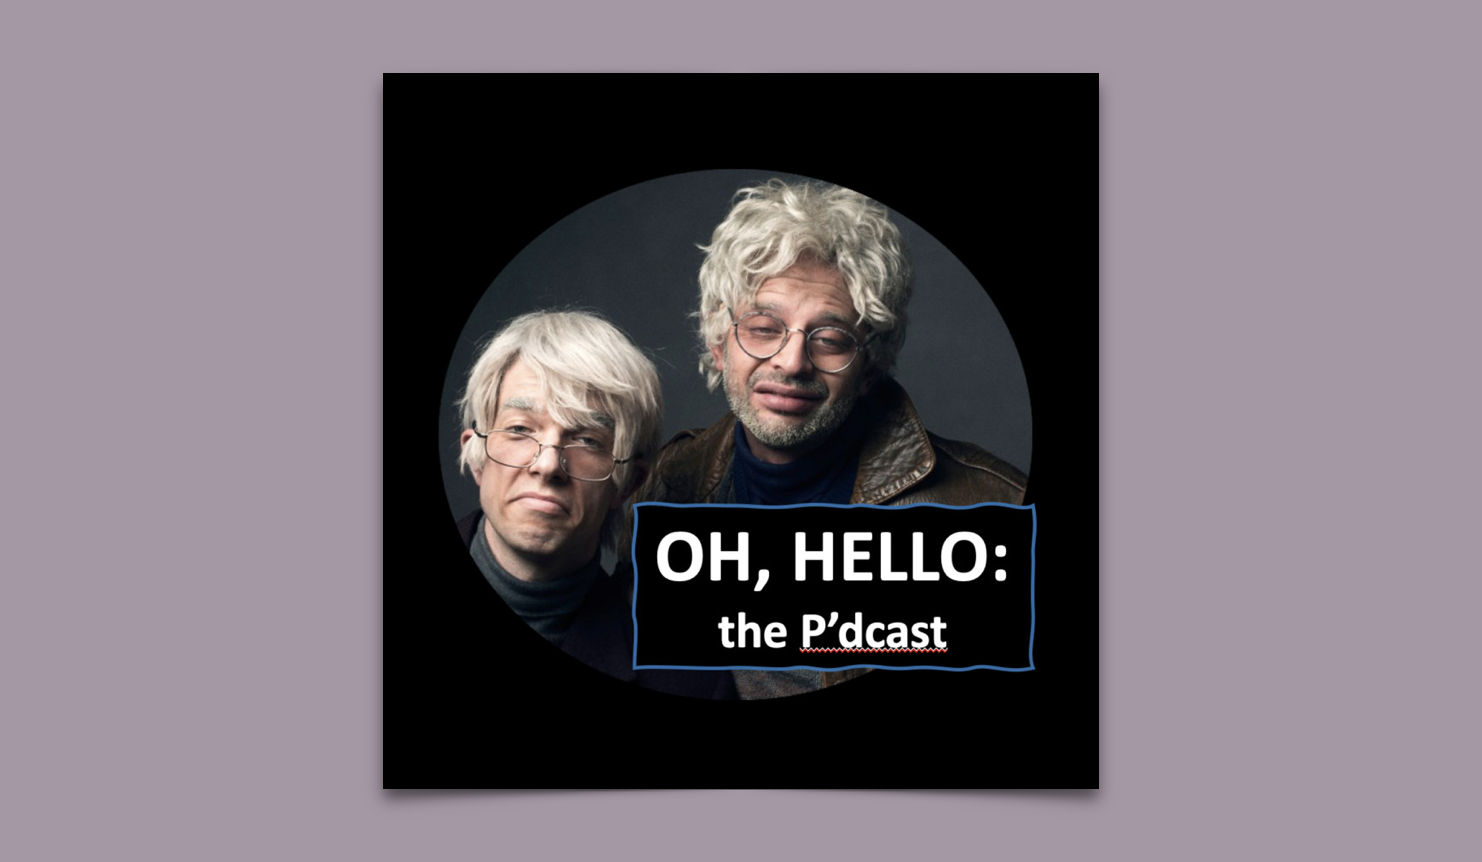 Oh, Hello the P'dcast